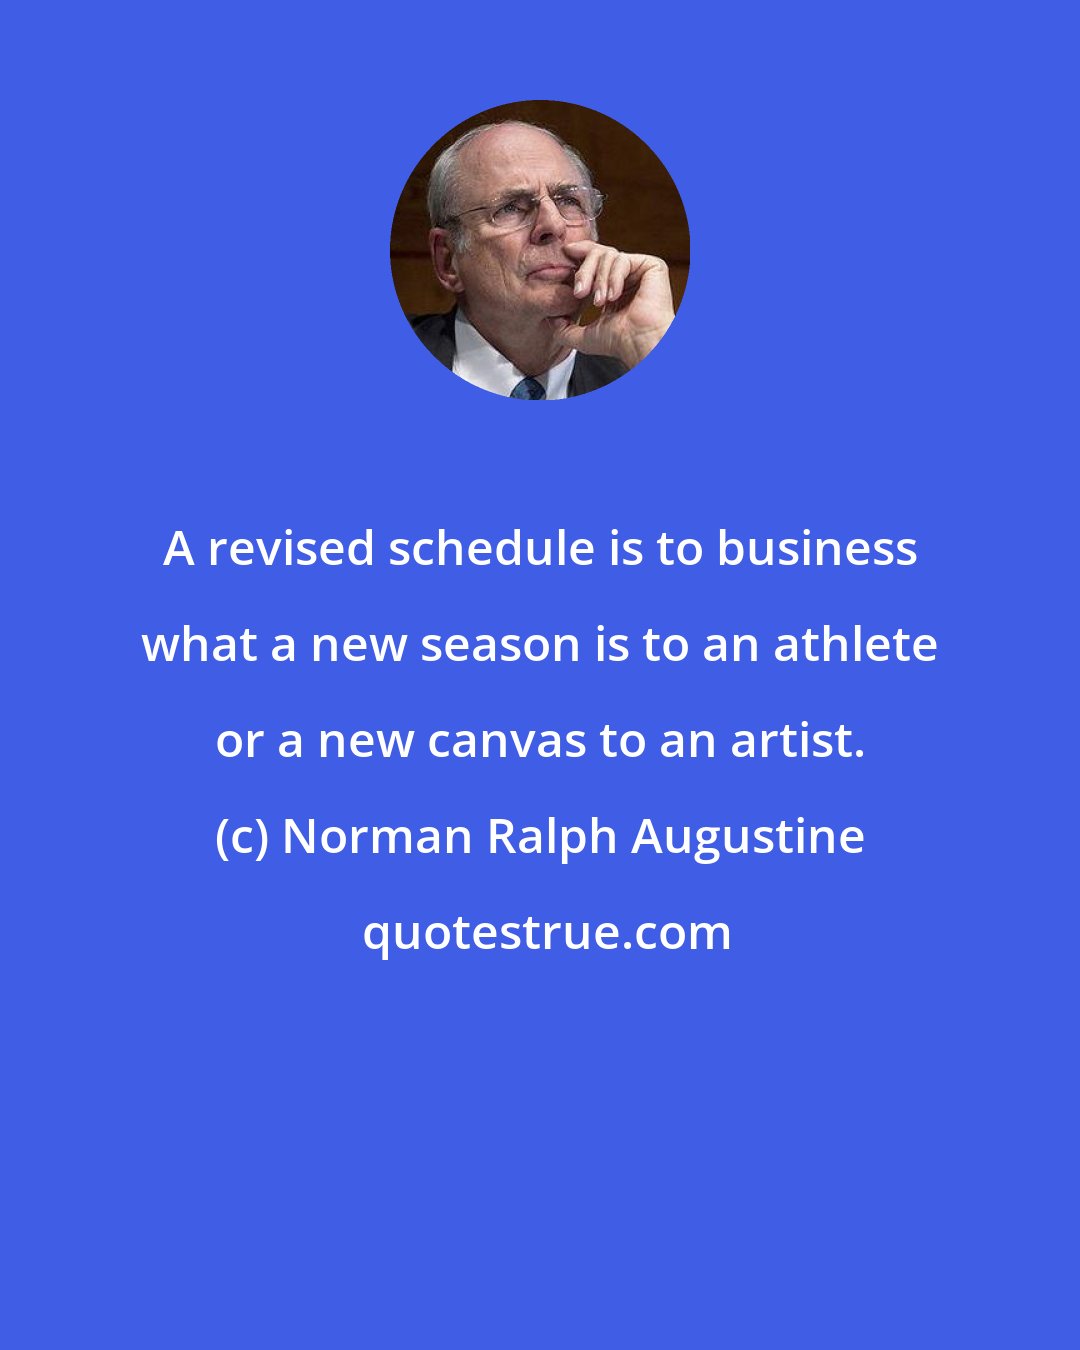 Norman Ralph Augustine: A revised schedule is to business what a new season is to an athlete or a new canvas to an artist.